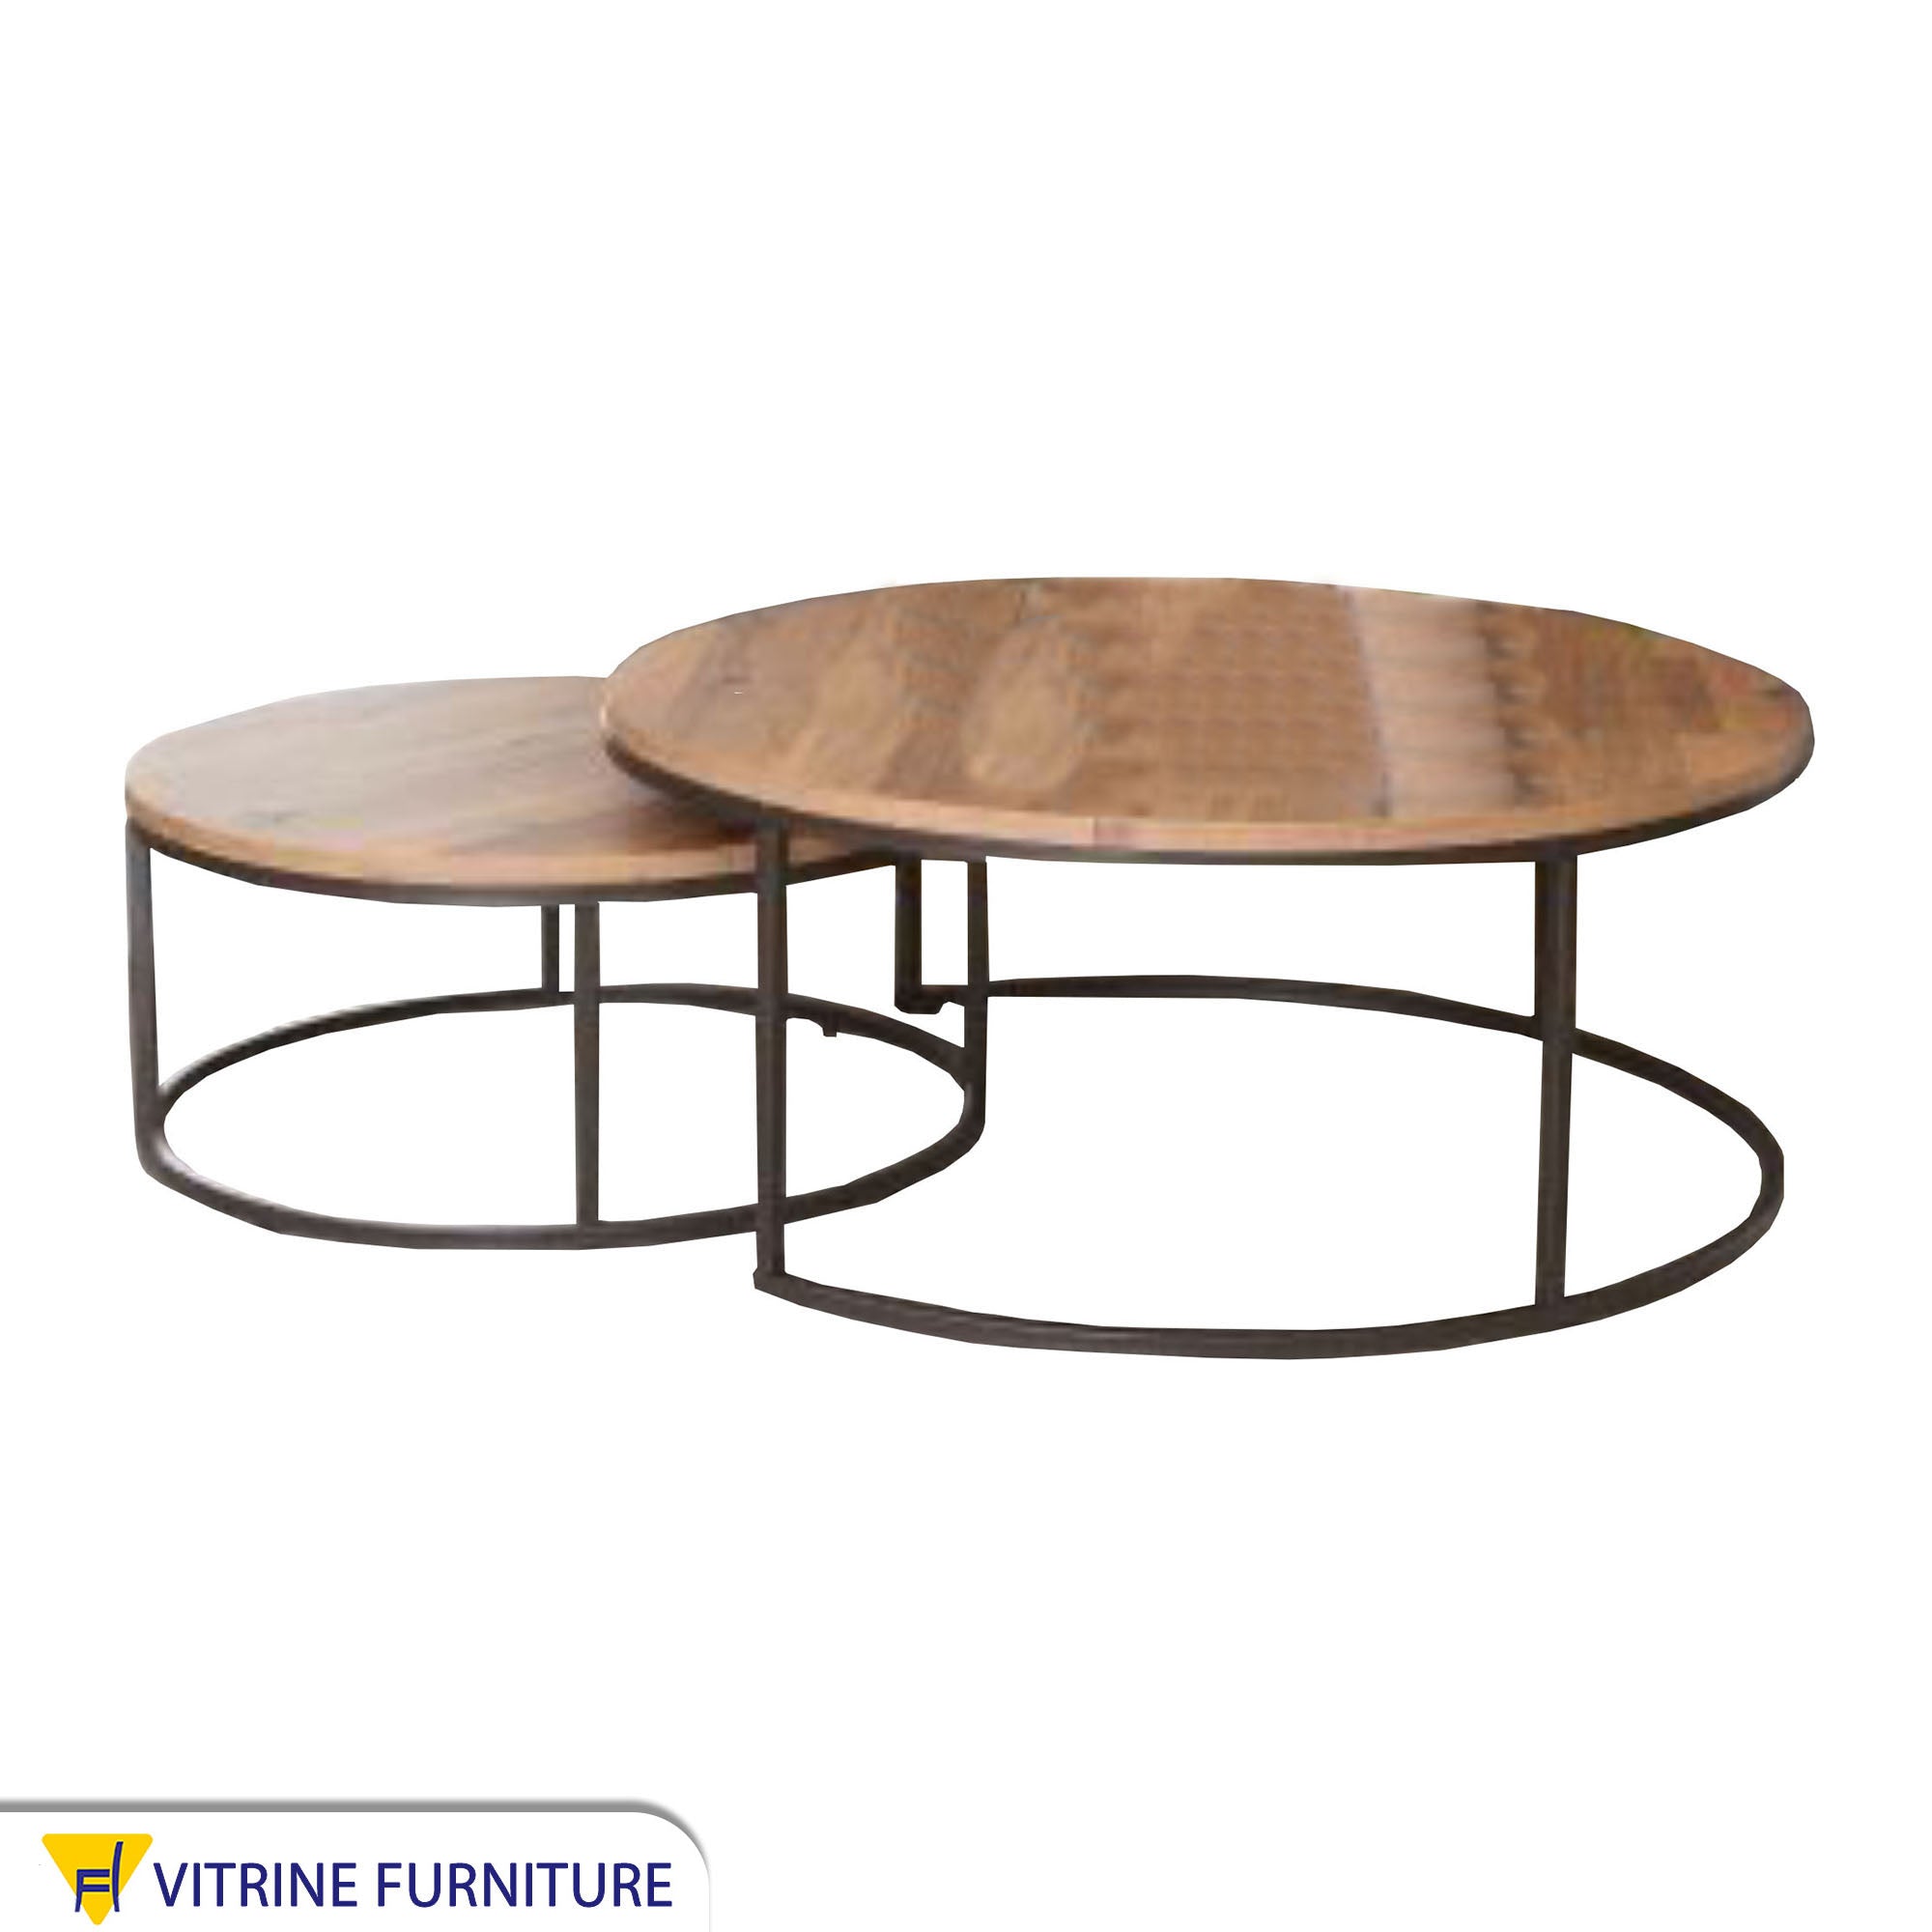 Two nested circular tables